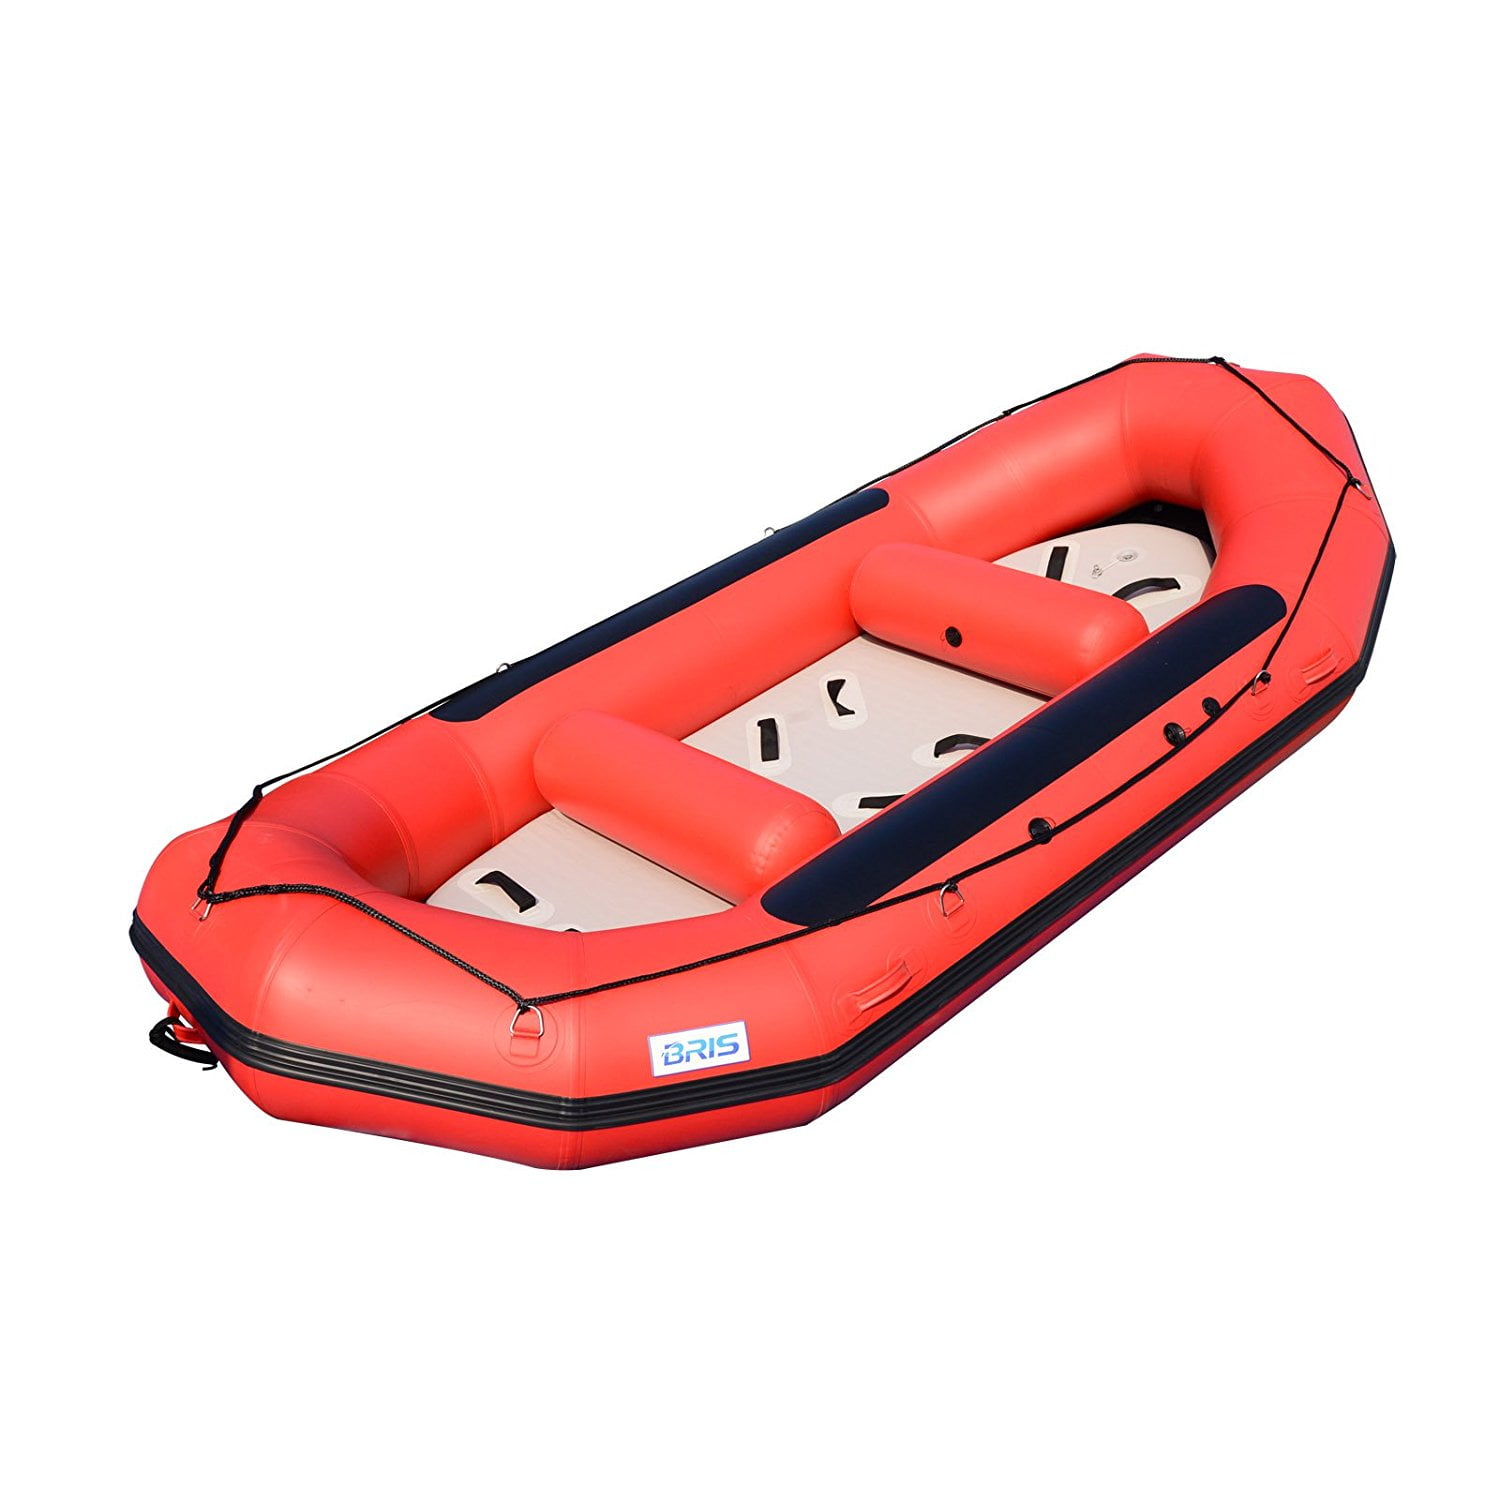 Camping Survival Campingsurvivals 7.5ft Inflatable Boat, 3